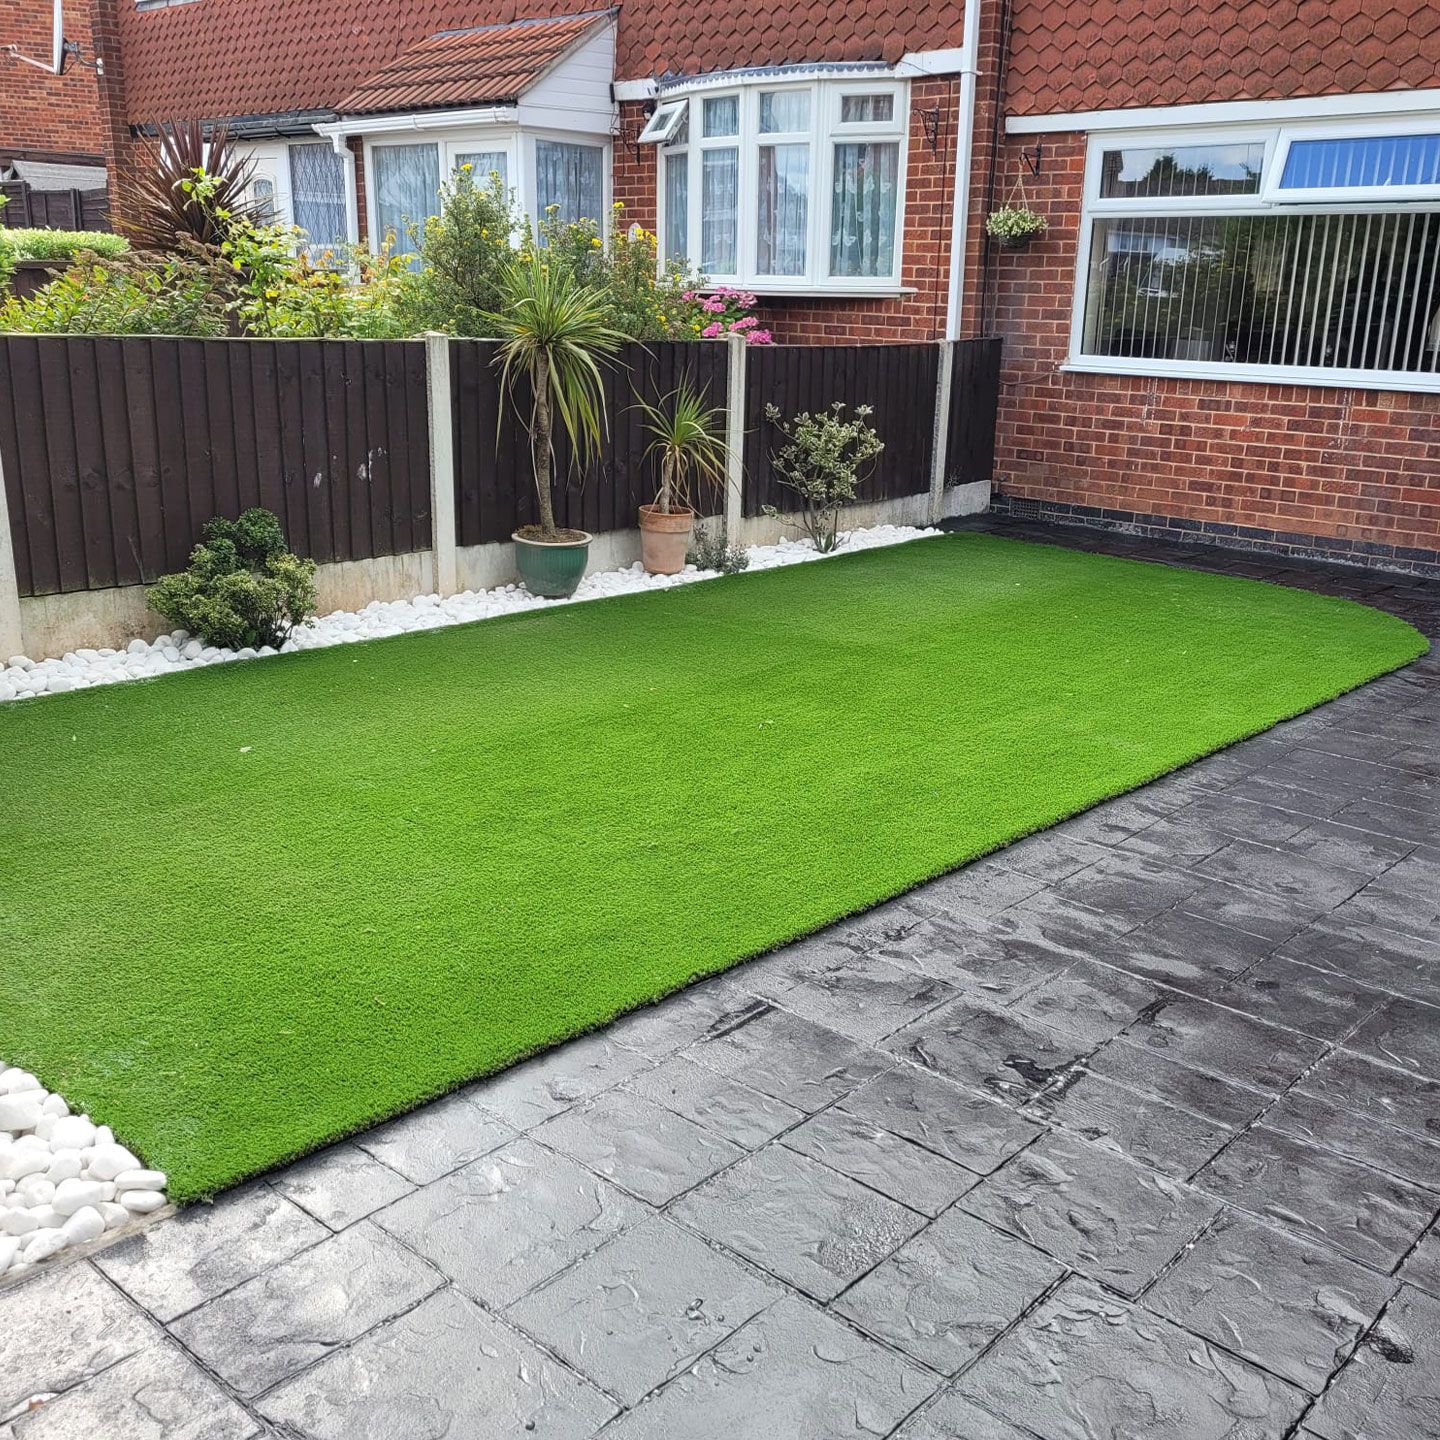 landscaping in Southam showing new artificial grass and patterned concrete paving